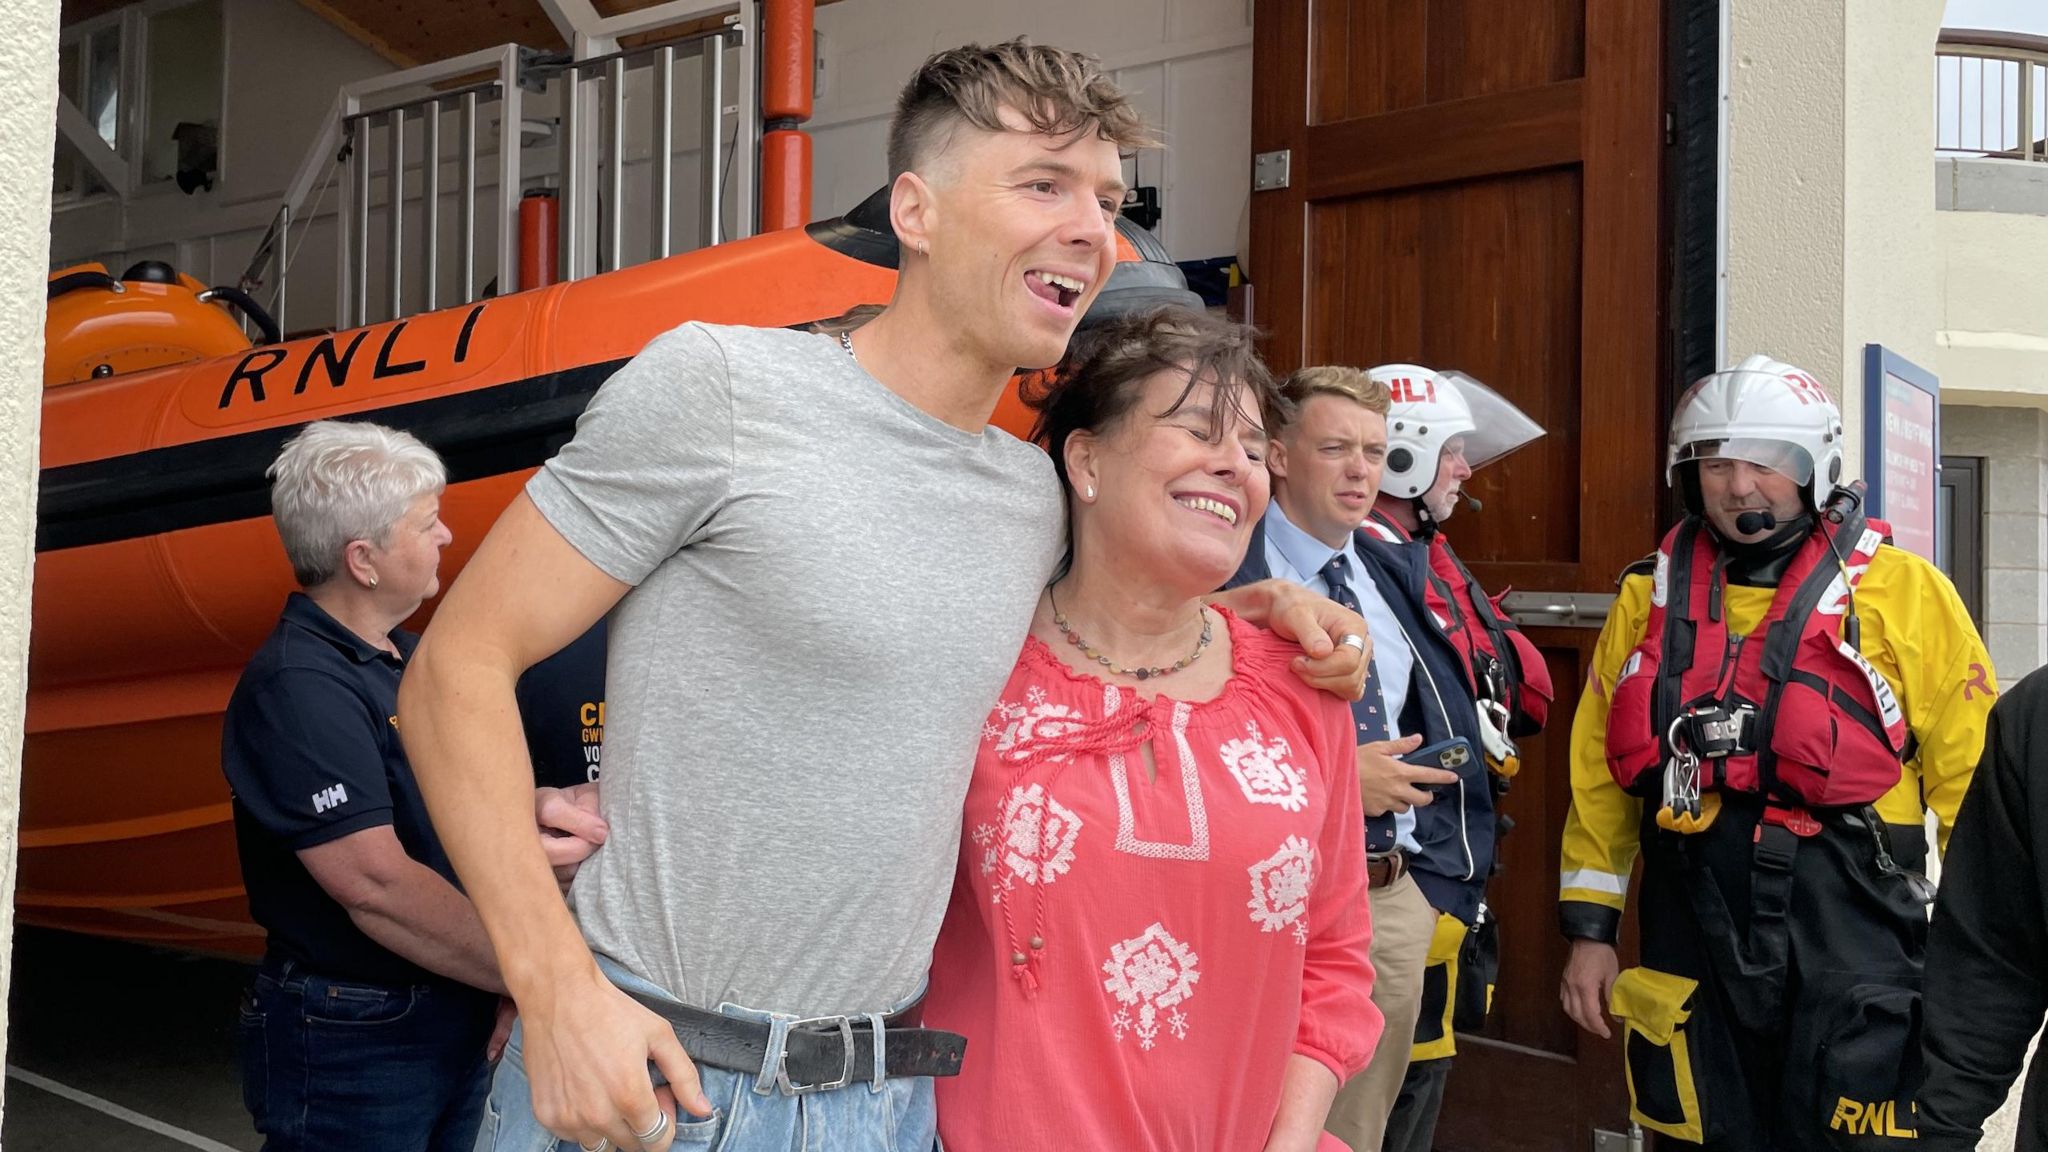 Ren Gill invites a fan to pose with him at the RNLI boat station in Beaumaris